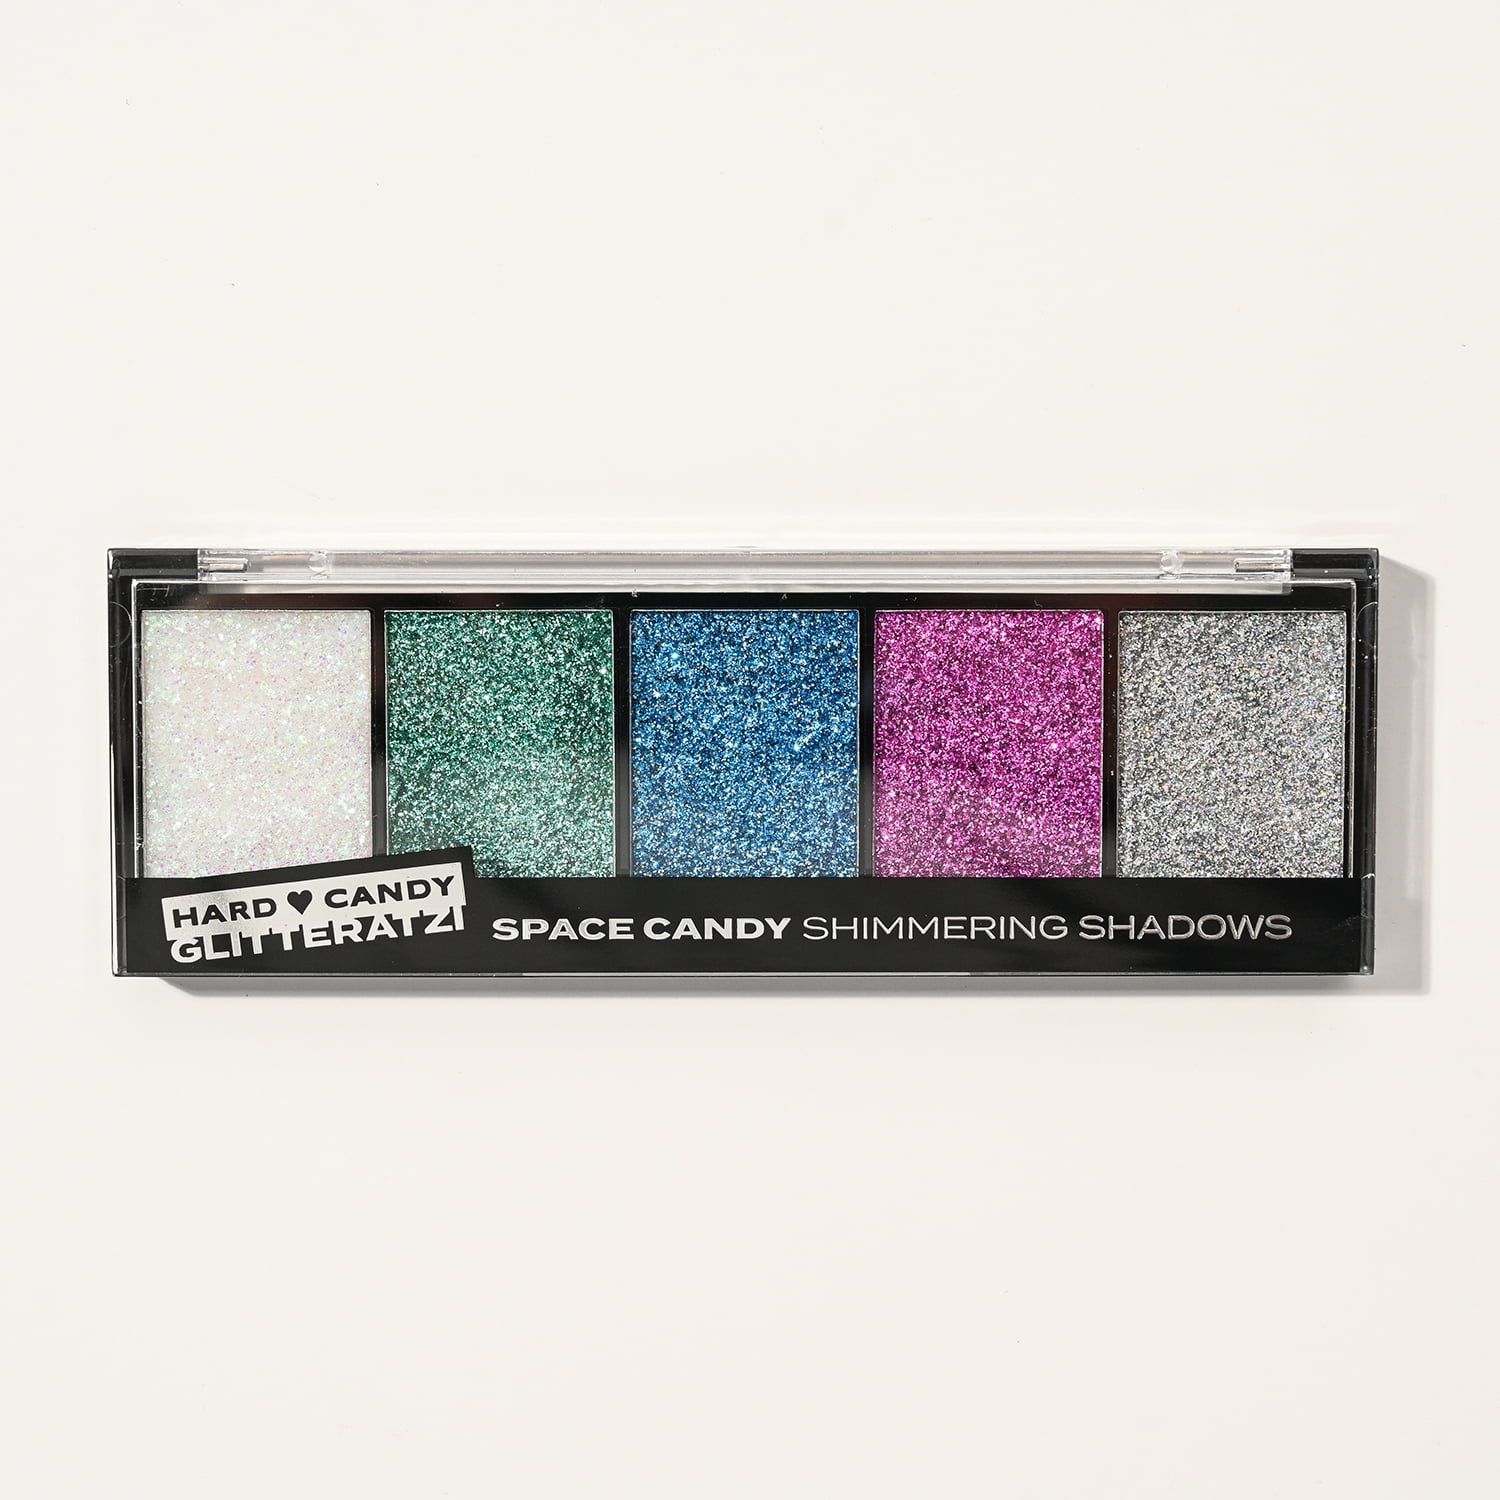 Hard Candy, Glitteratzi Shadow Palette, Space Candy, 5 Shimmering Shadows